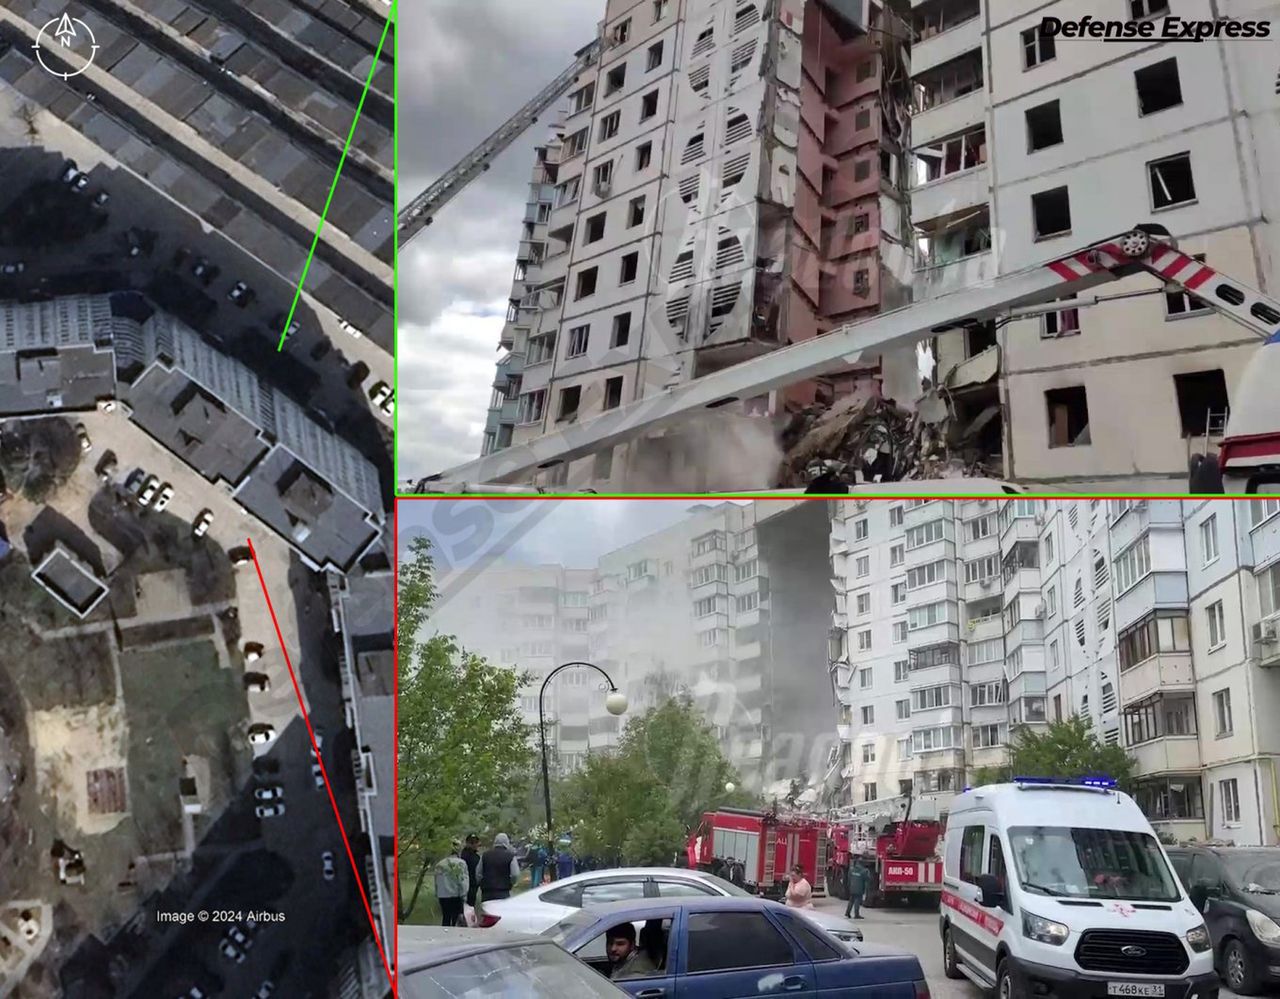 Experts from Defense Express suggest that the building could have been destroyed by a missile fired from Russia.